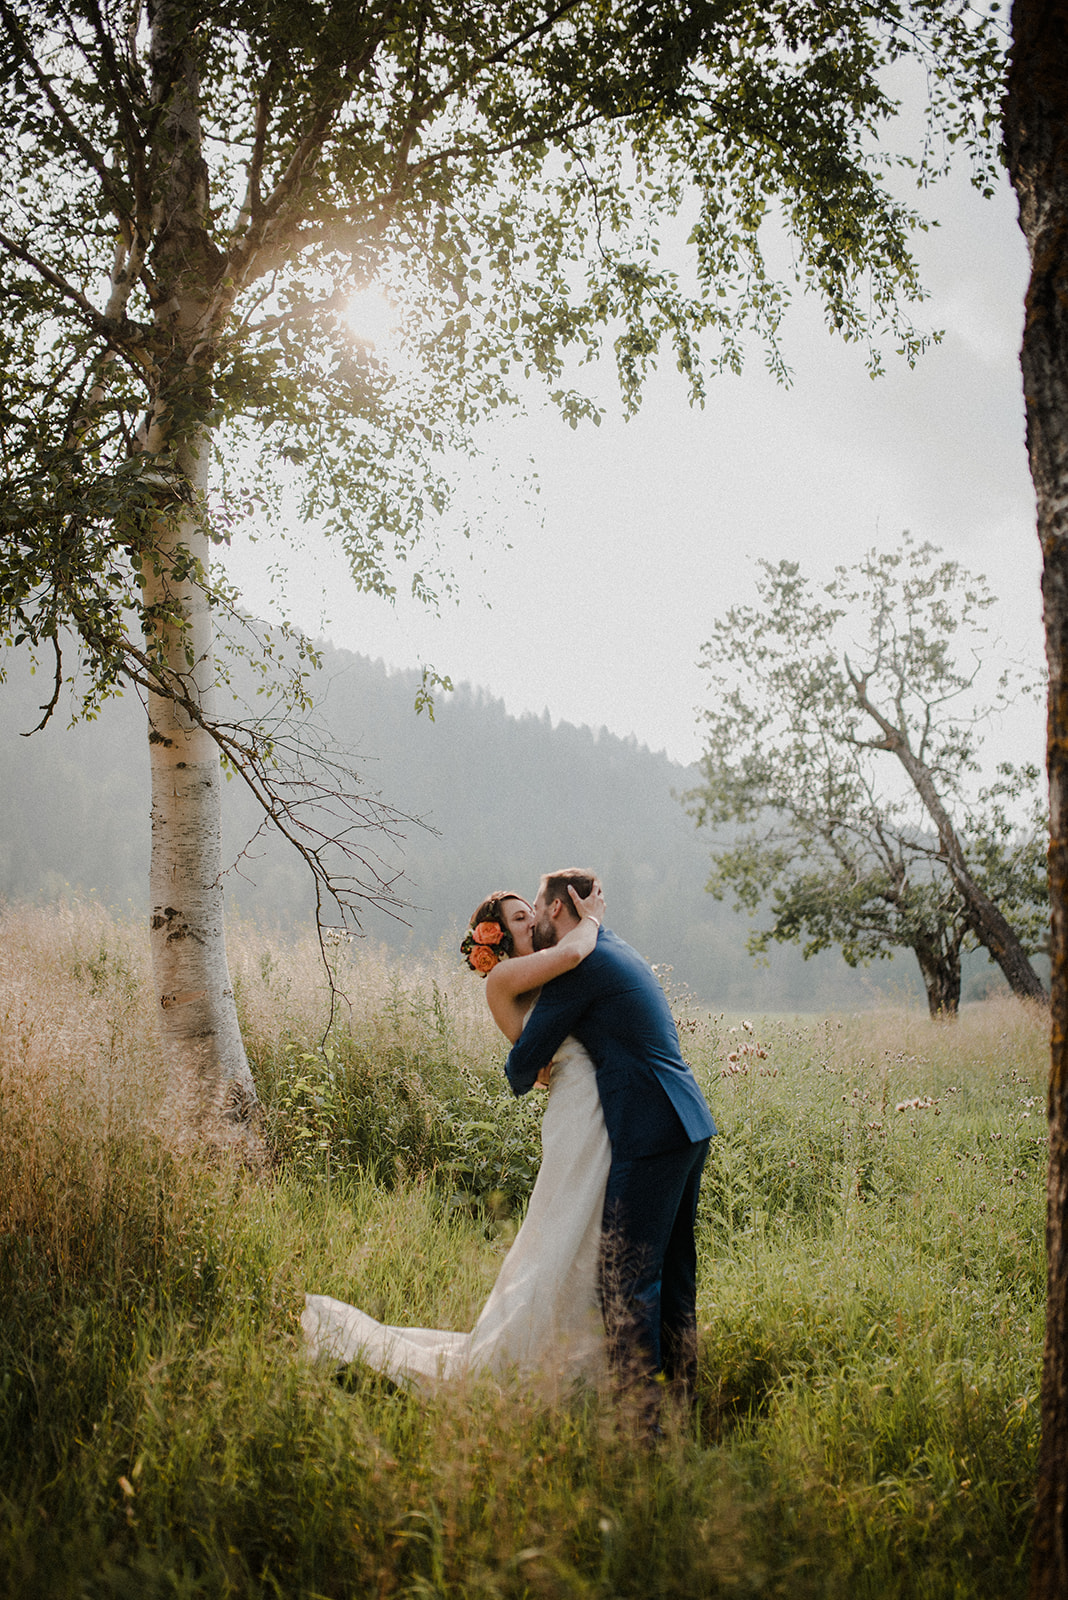 nothing attests to the success of pinterest services from meet pepper like a rad image of a bride and groom celebrating their elopement with a sweet smooch in a mountain meadow